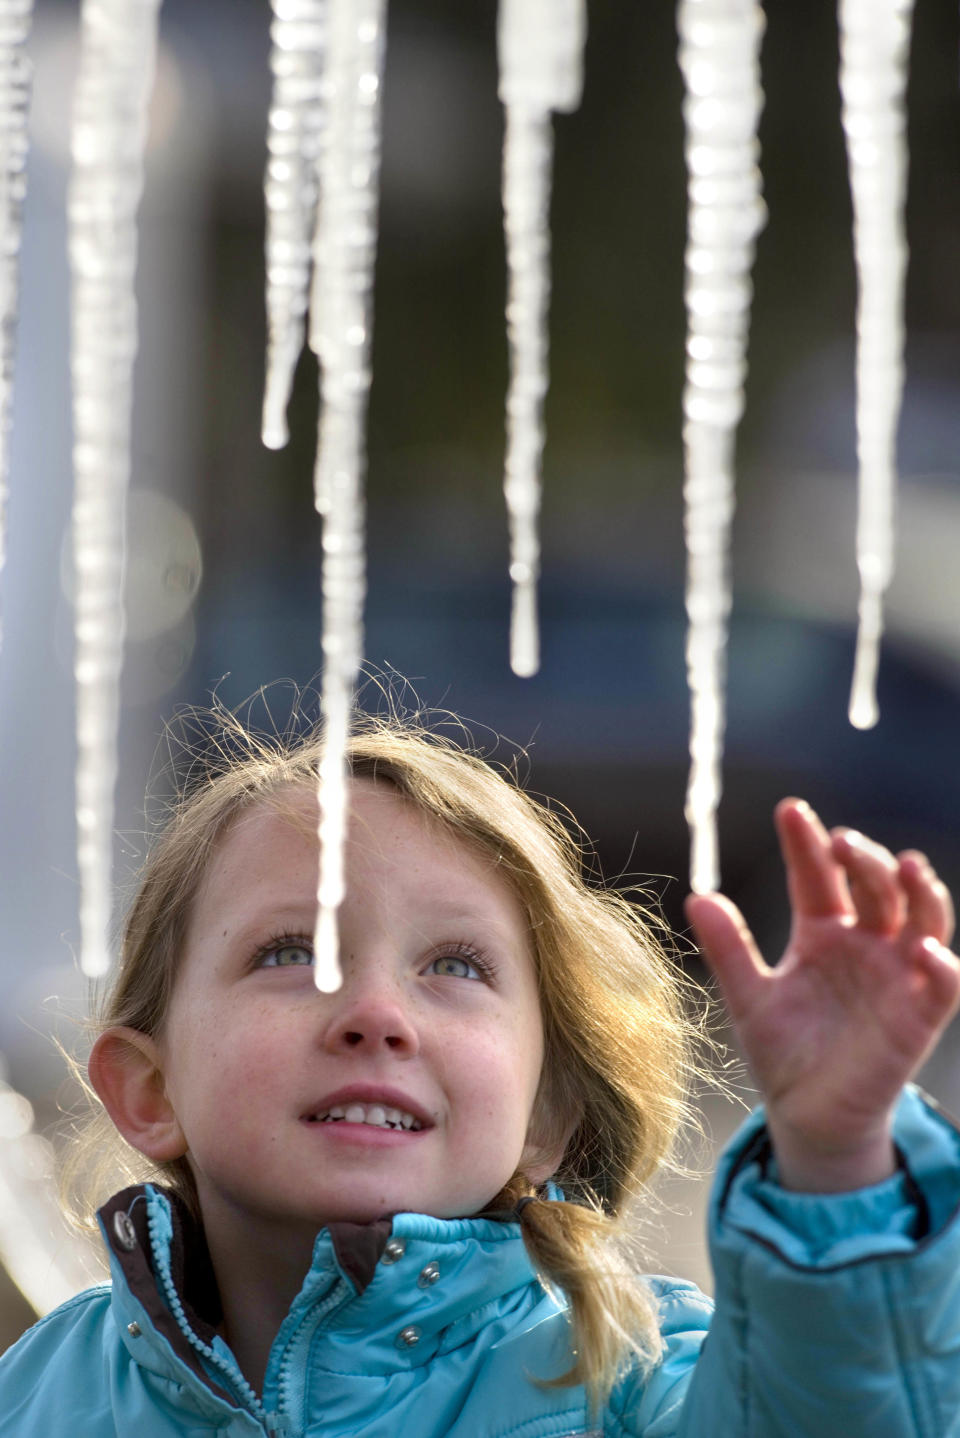 Tessa Lind examines icicles hanging from a tree in the yard of her home, Tuesday, Jan. 7, 2014, in Fort Walton Beach, Fla. Like much of the nation, the Florida panhandle experienced freezing temperatures, with overnight lows Monday dipping to around 18 degrees Fahrenheit. (AP Photo/Northwest Florida Daily, Devon Ravine)